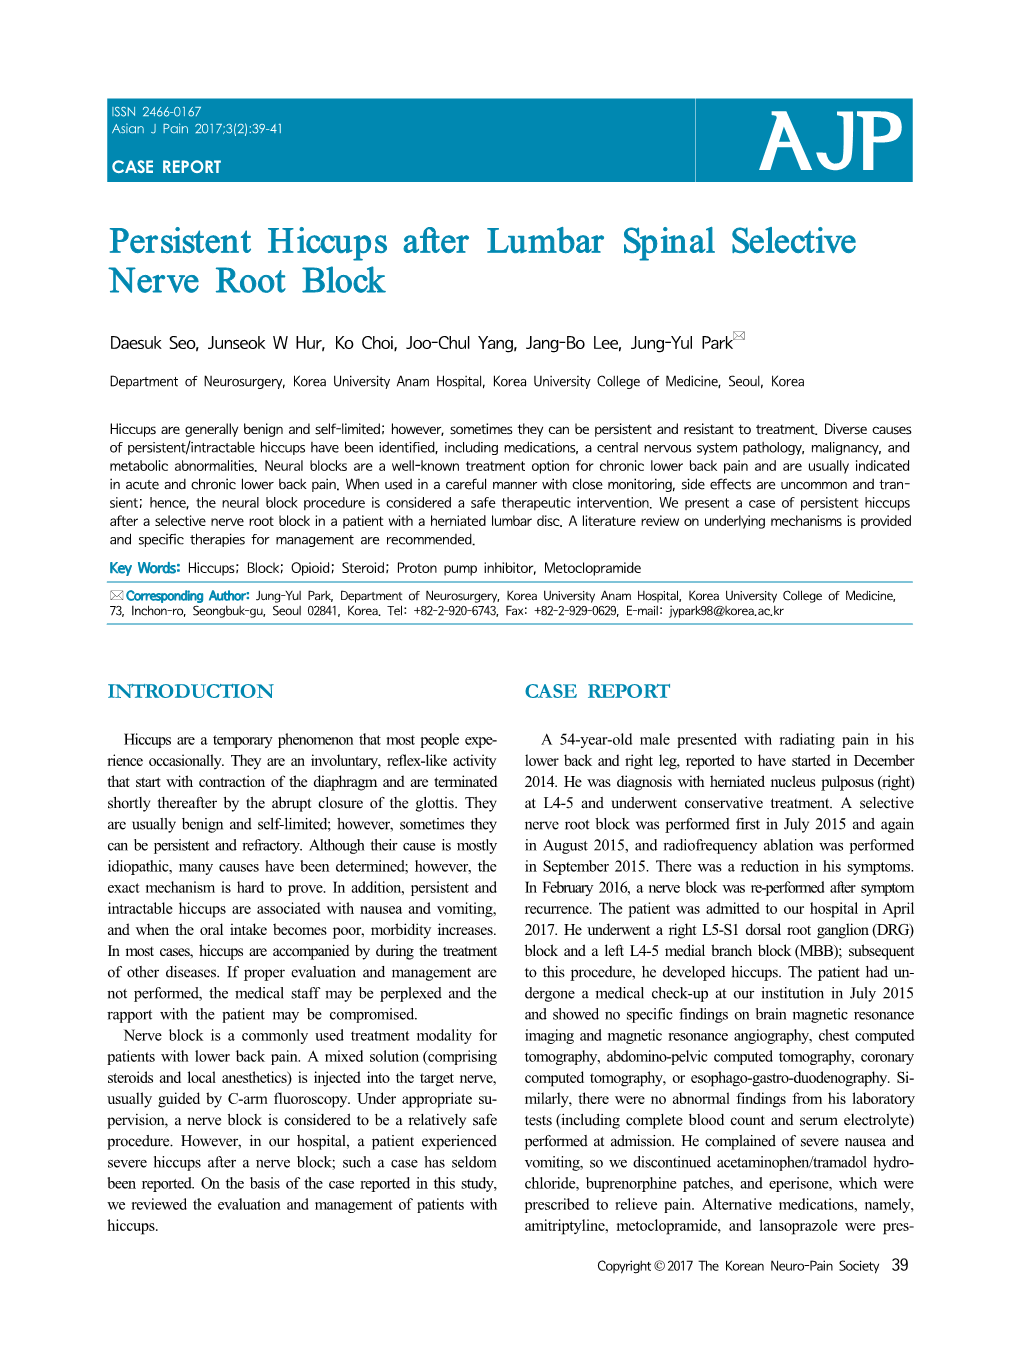 Persistent Hiccups After Lumbar Spinal Selective Nerve Root Block